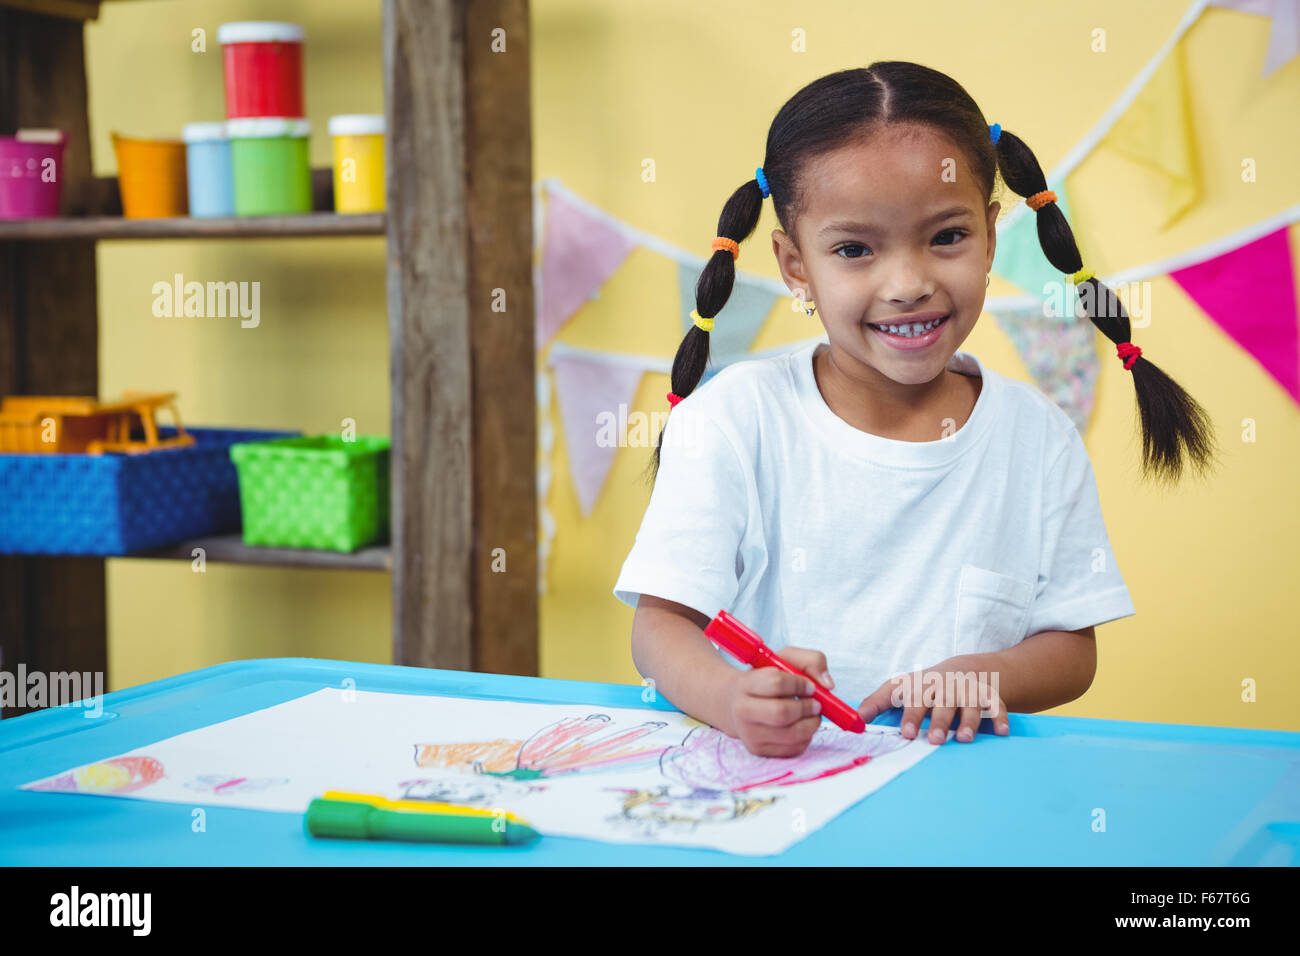 Smiling girl drawing in her colouring book Stock Photo